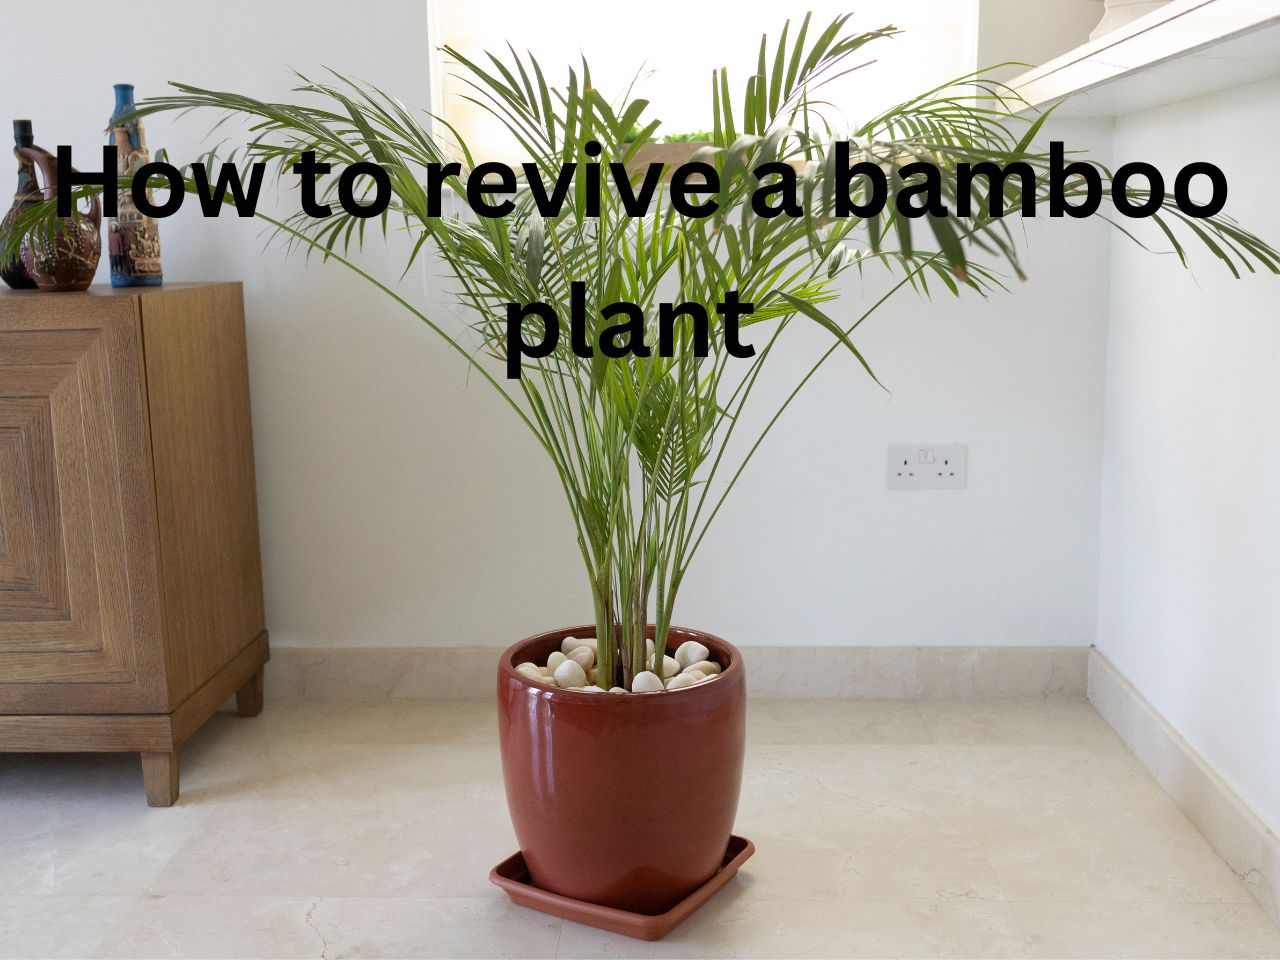 How to revive a bamboo plant